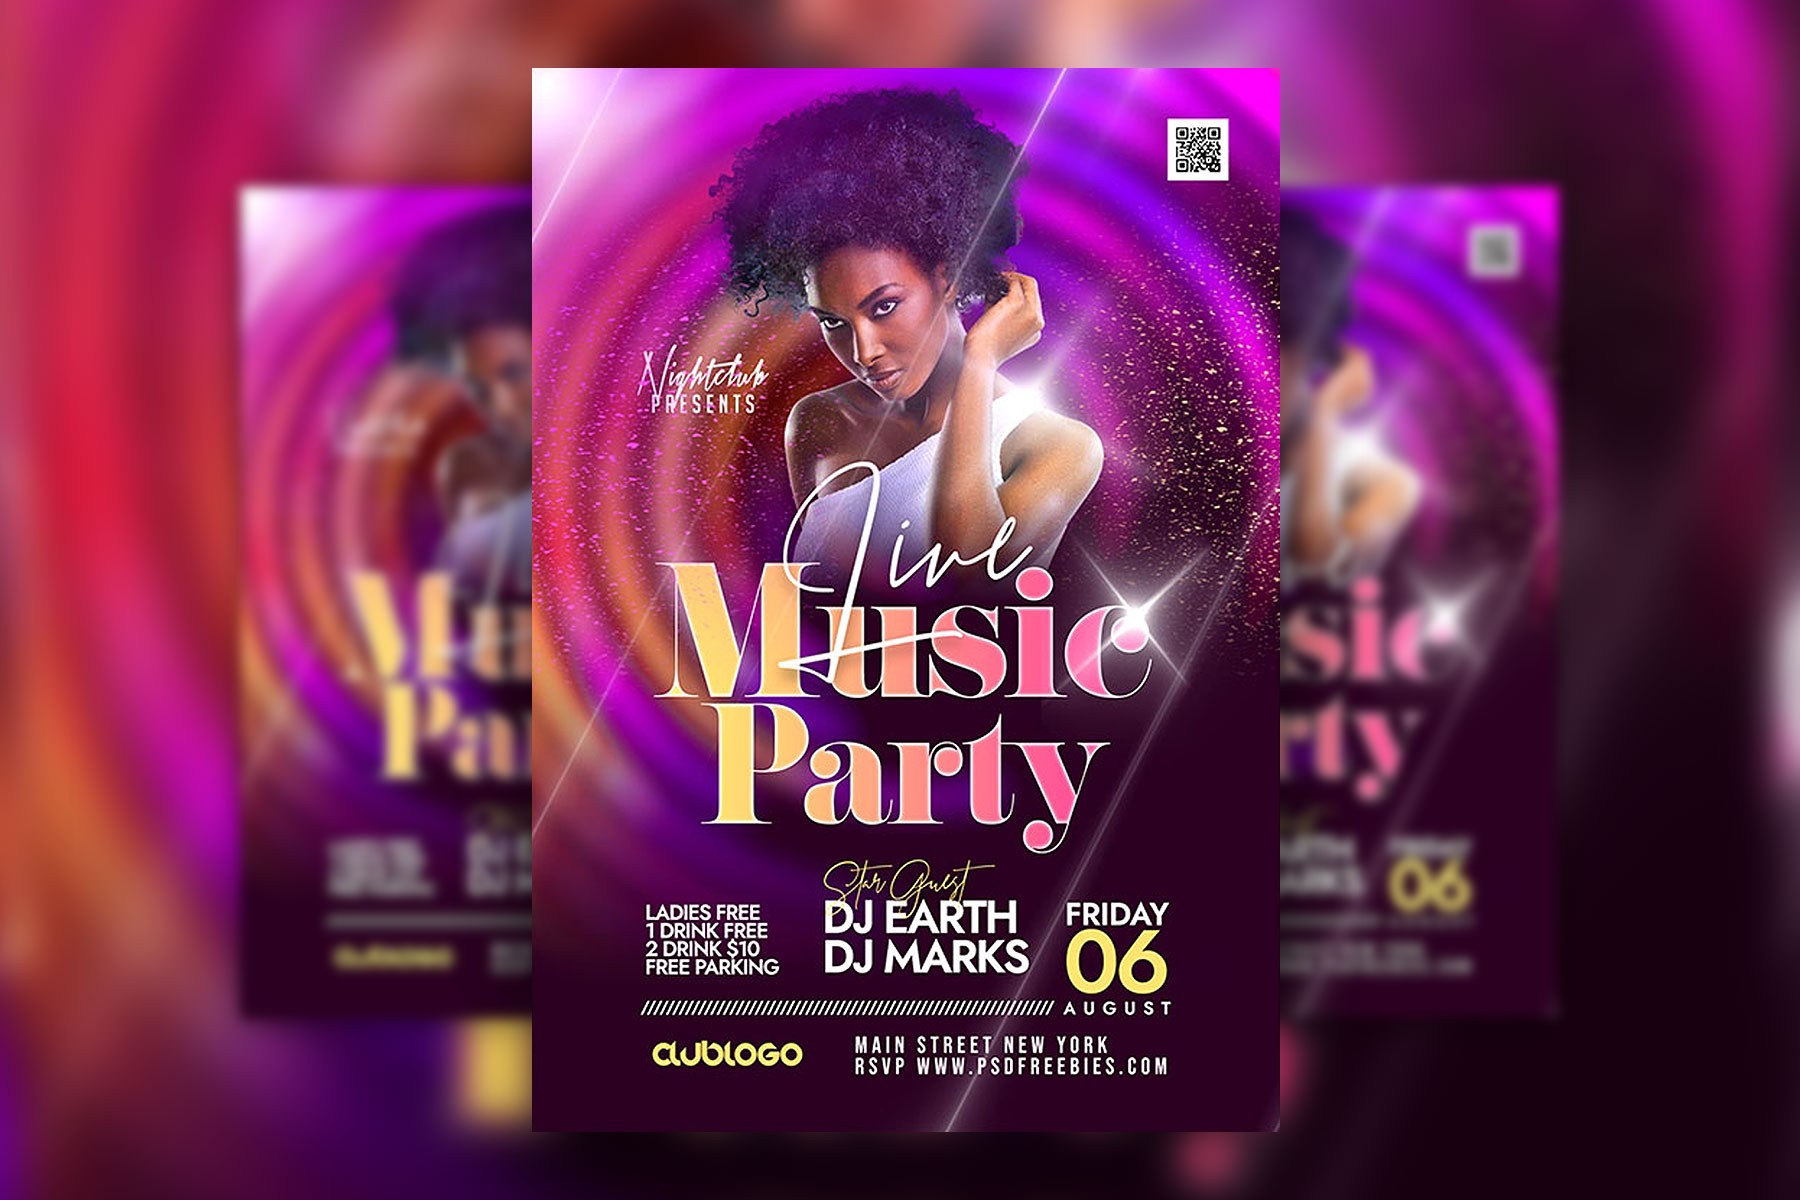 Starry Galactic Live Music Party Flyer Template